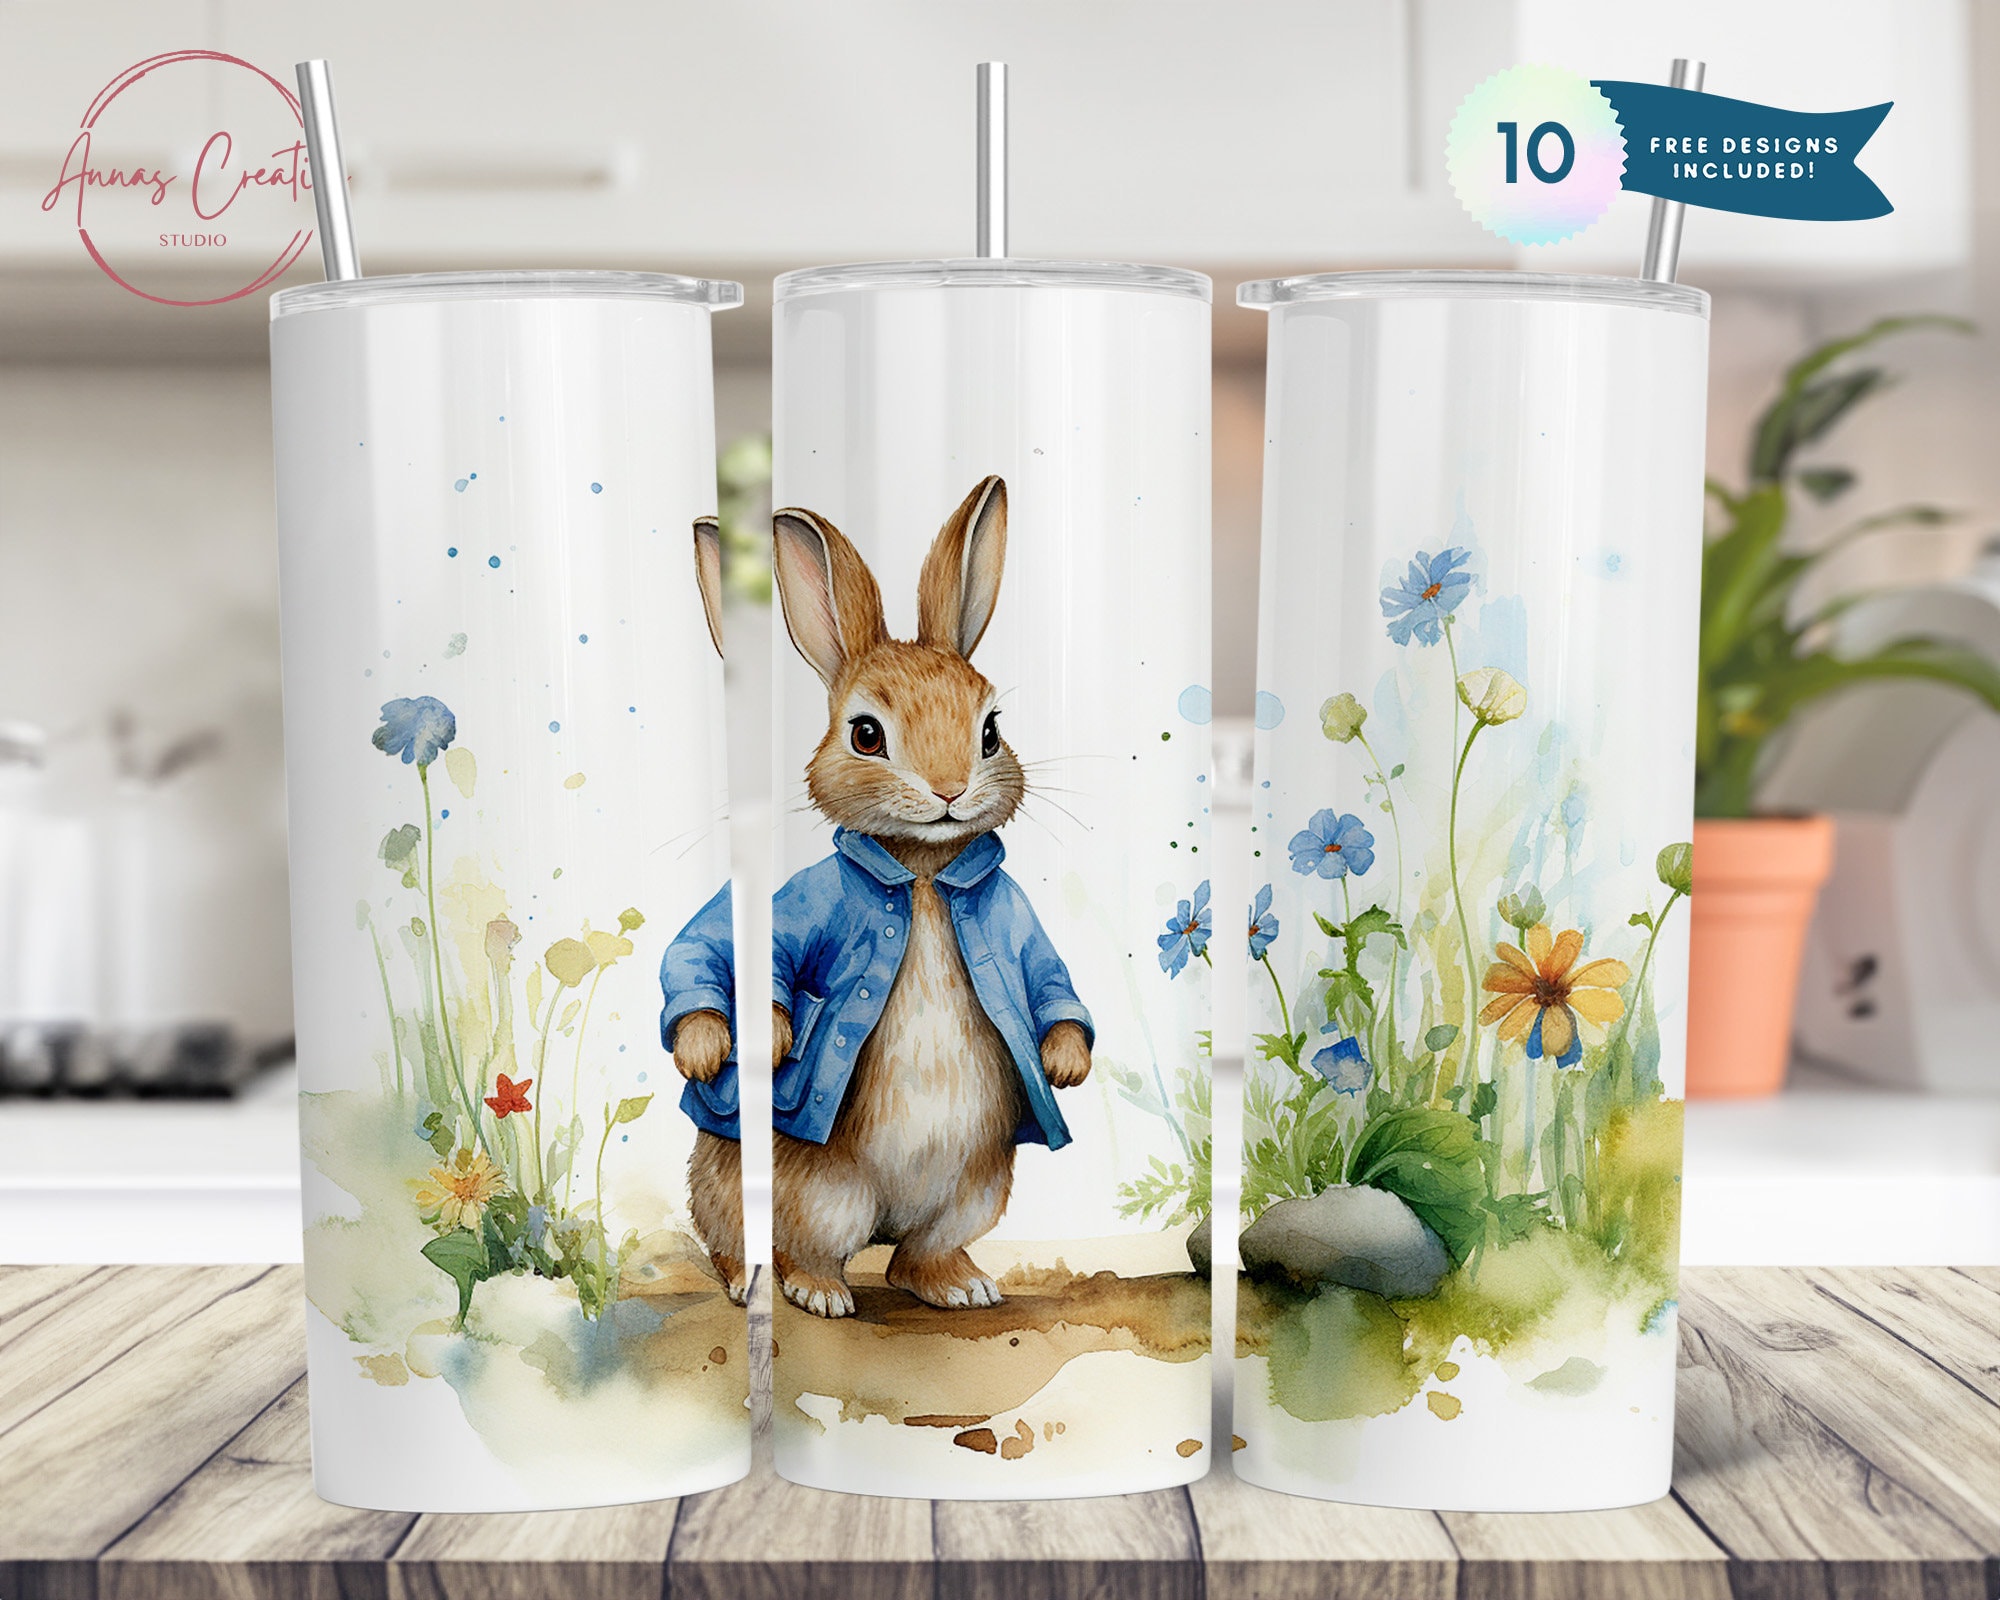 An Adorable Peter Rabbit Baby Shower – Teacups and Glitter